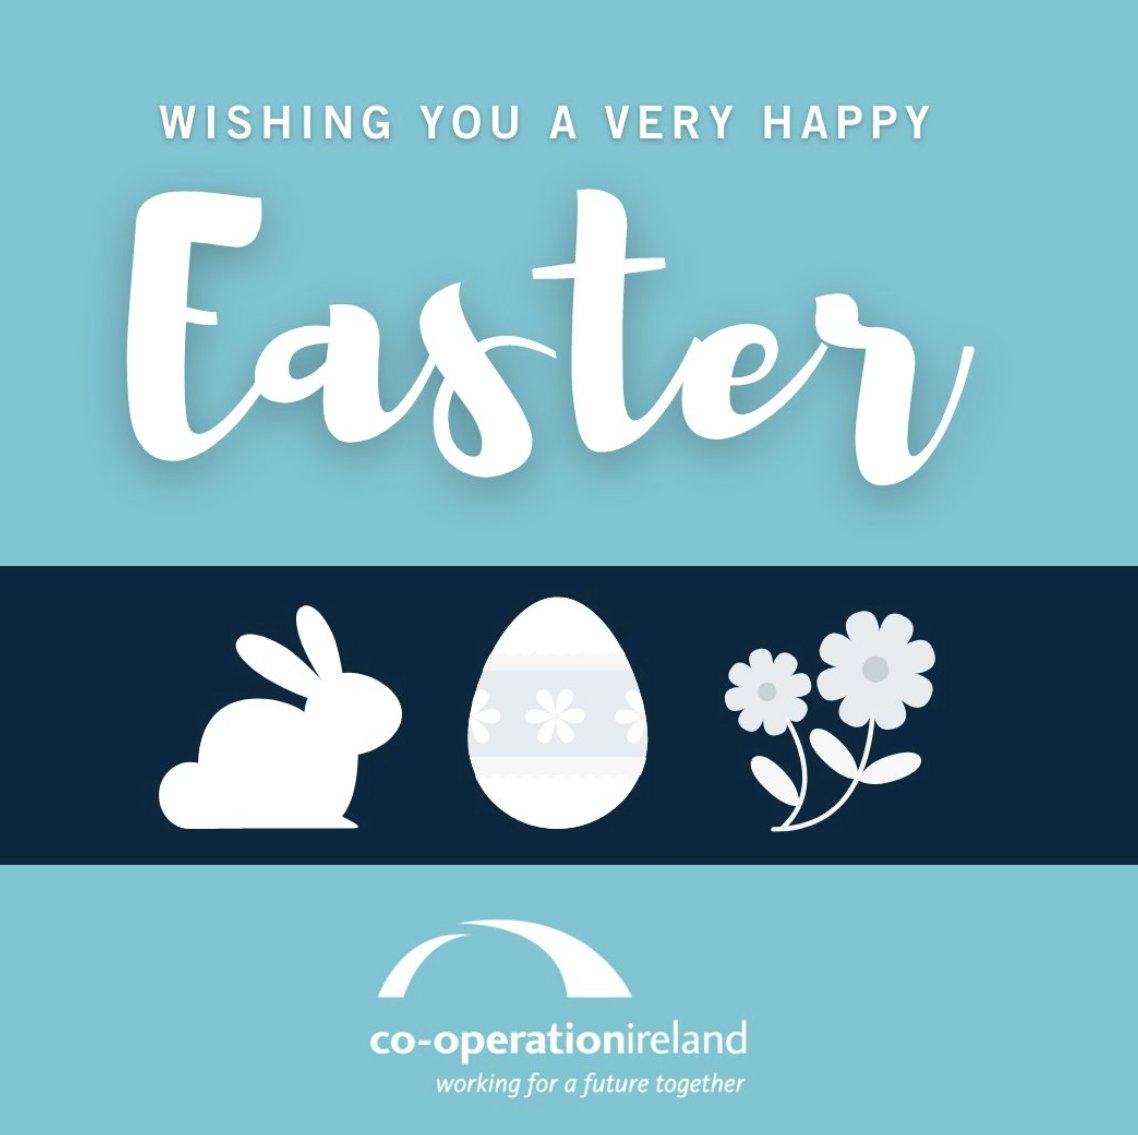 Wishing our supporters, staff and public a very happy Easter, from all of us at Co-operation Ireland!